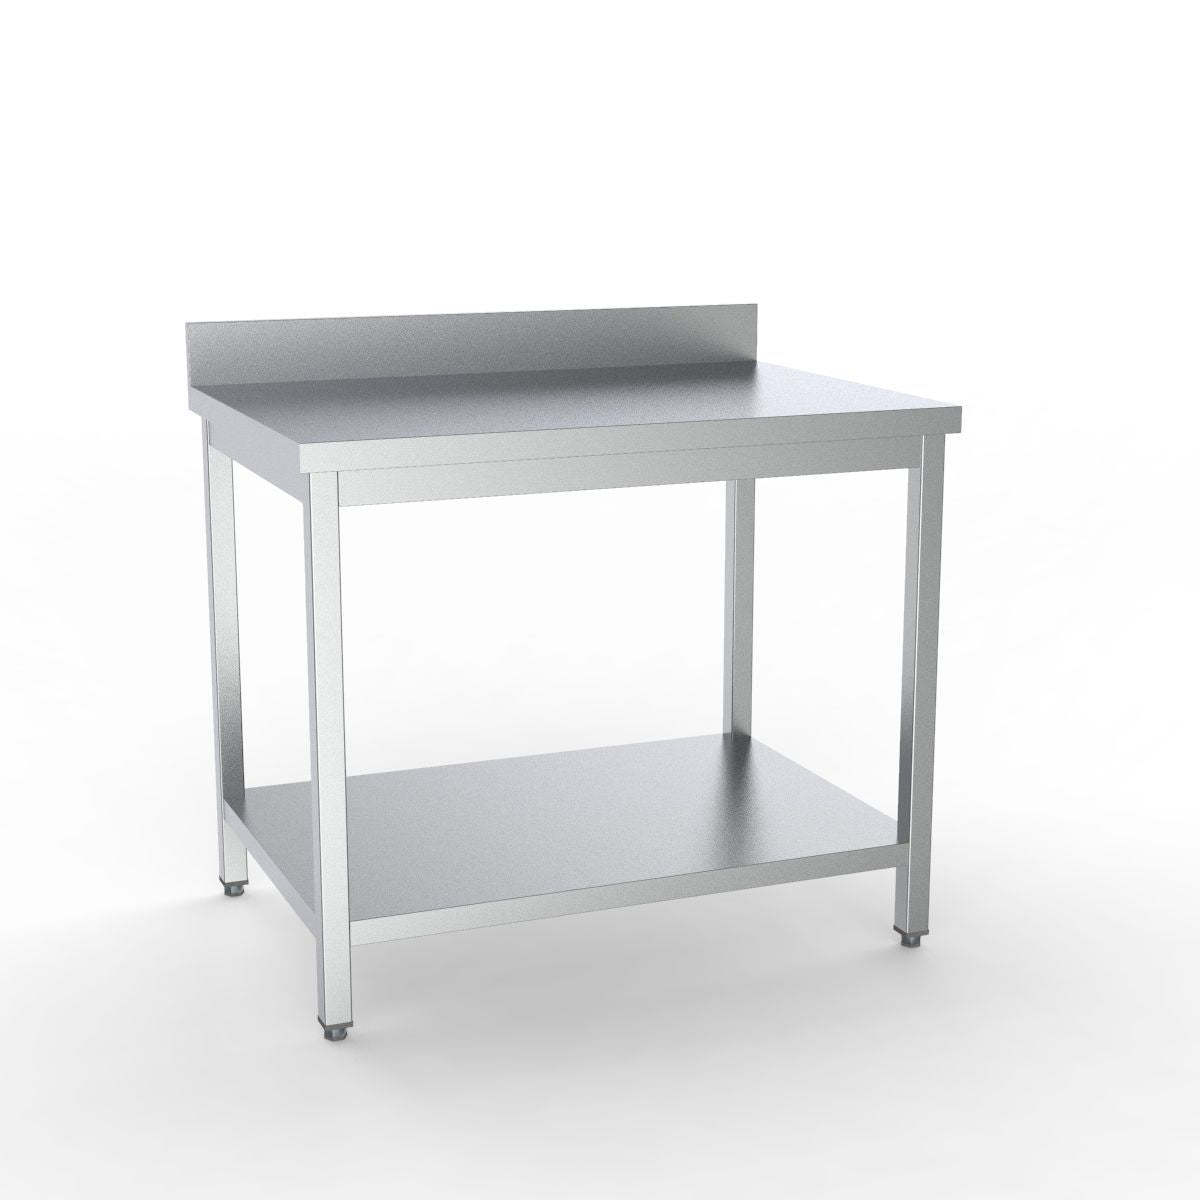 Combisteel Full 430 Stainless Steel 600 Line Worktable With Shelf & Upstand  1000mm Wide - 7333.0092